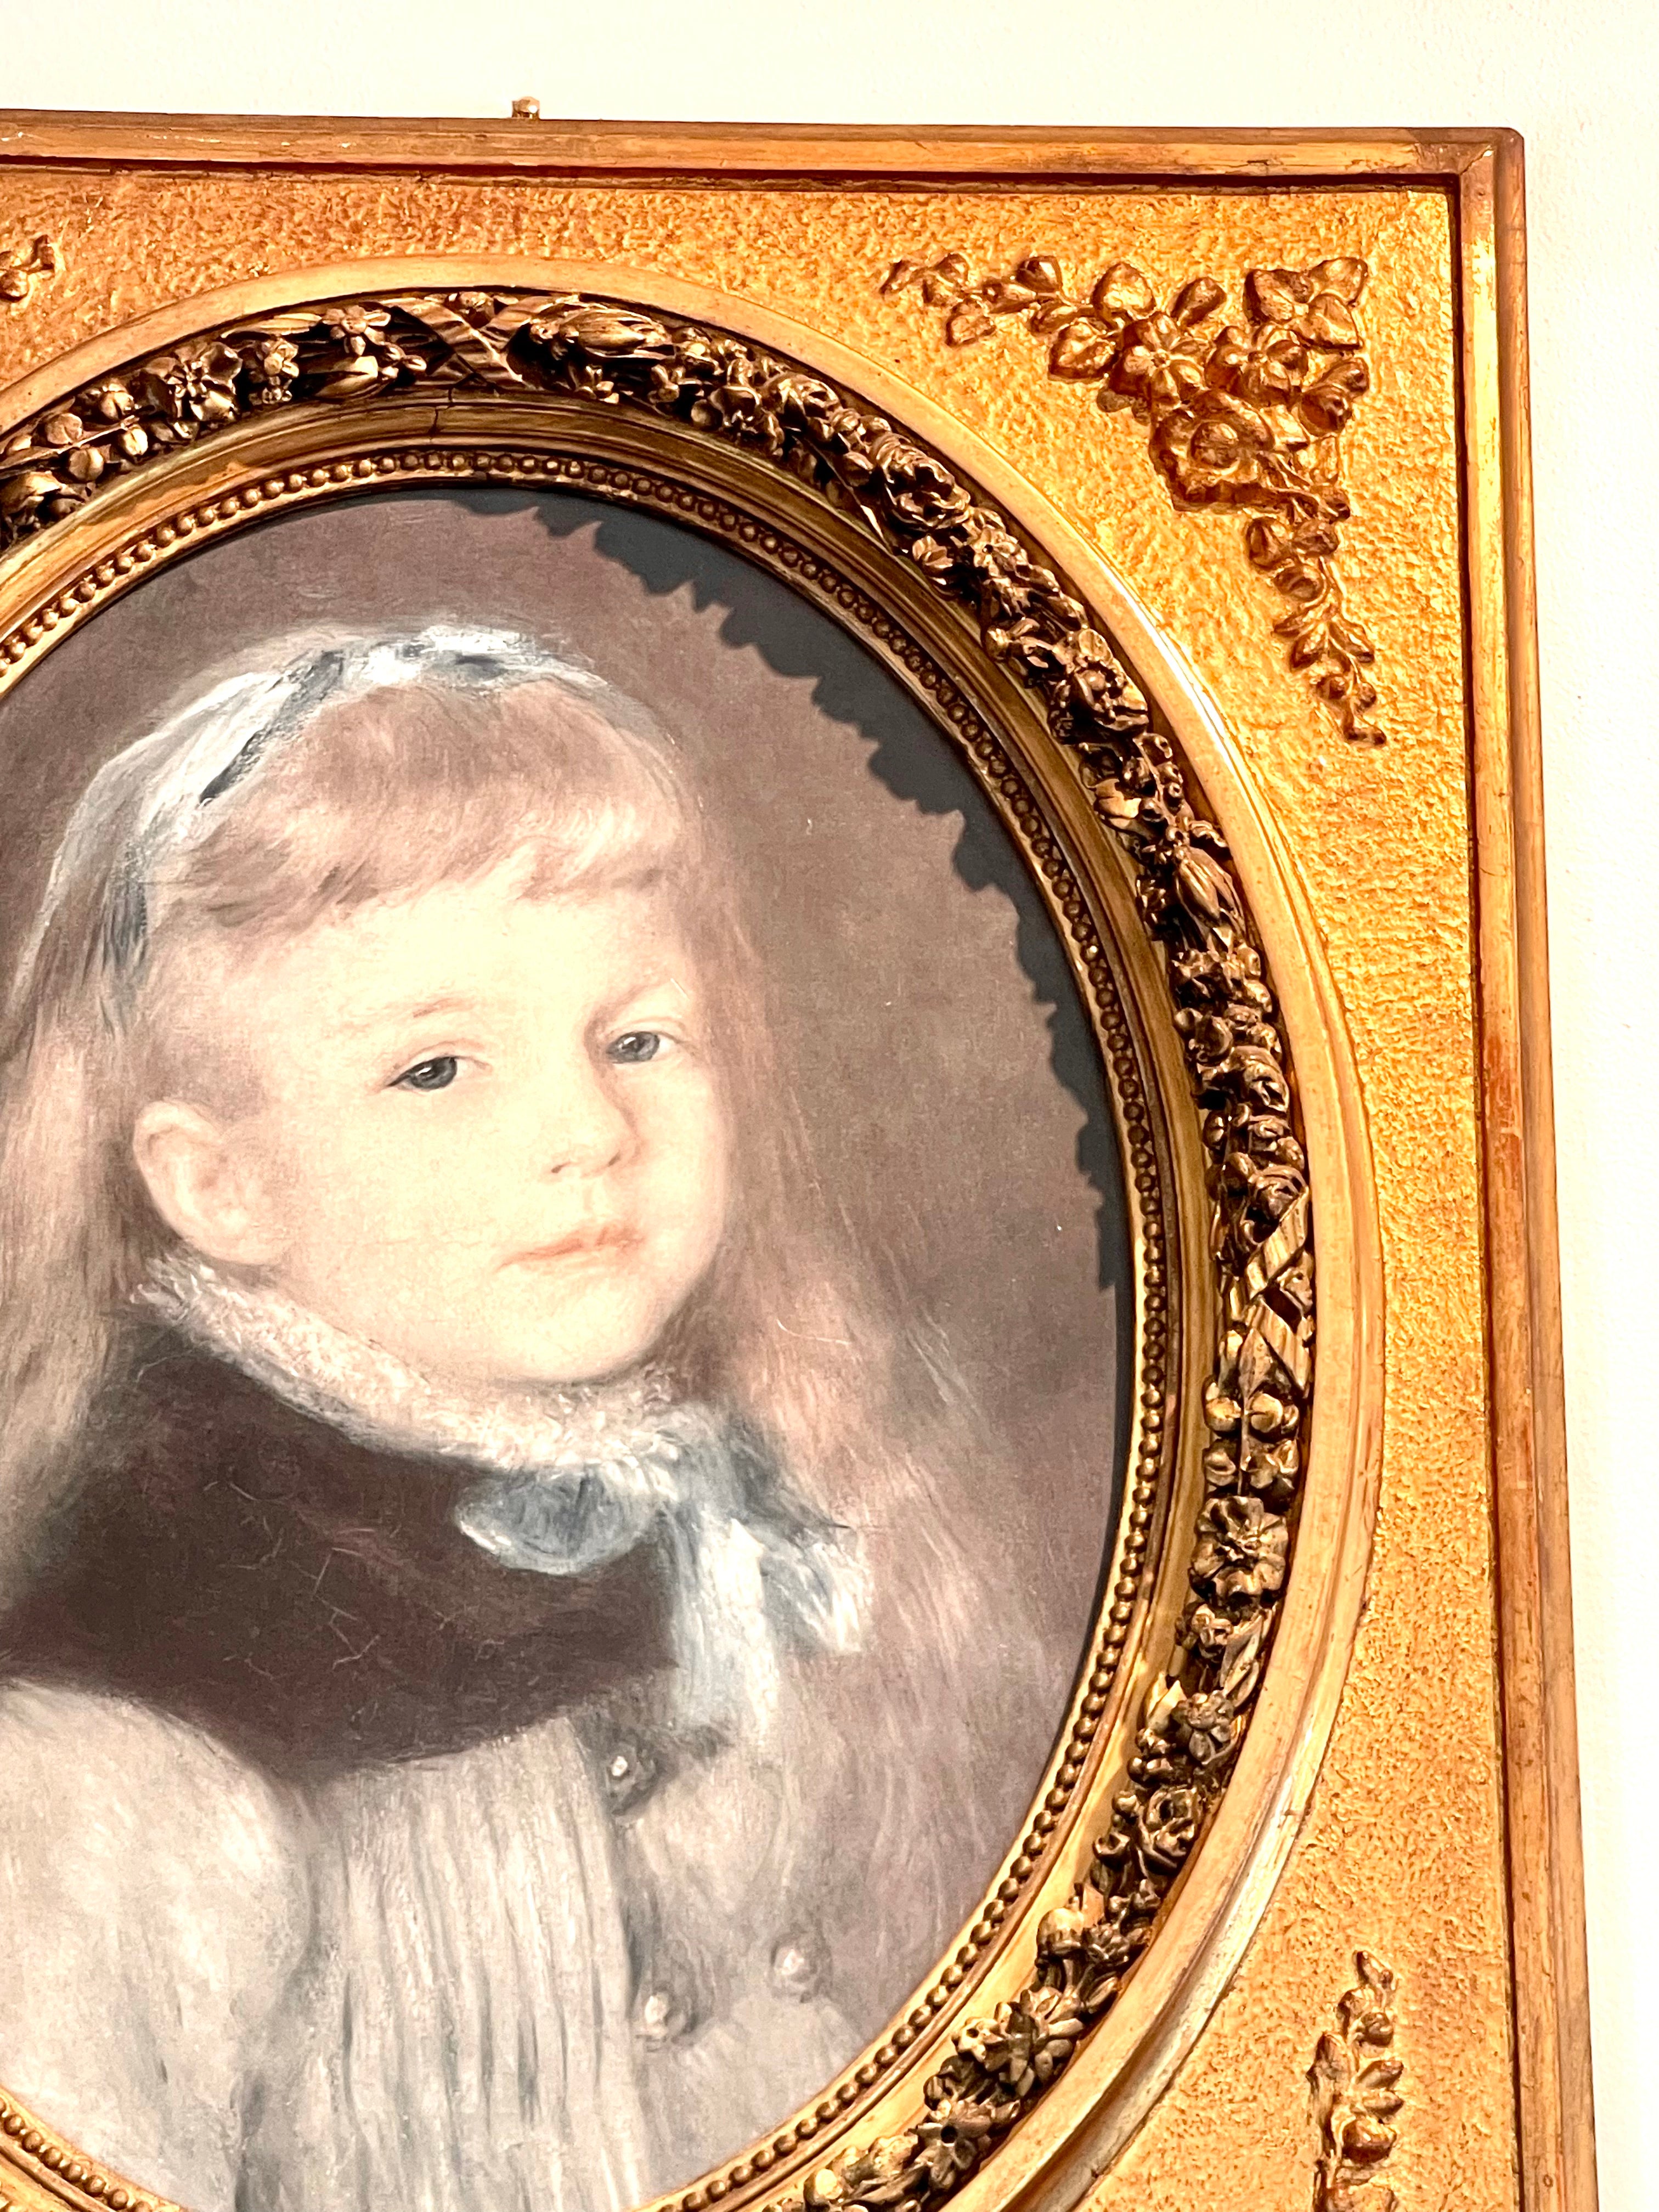 Lovely Antique French Portrait of young girl